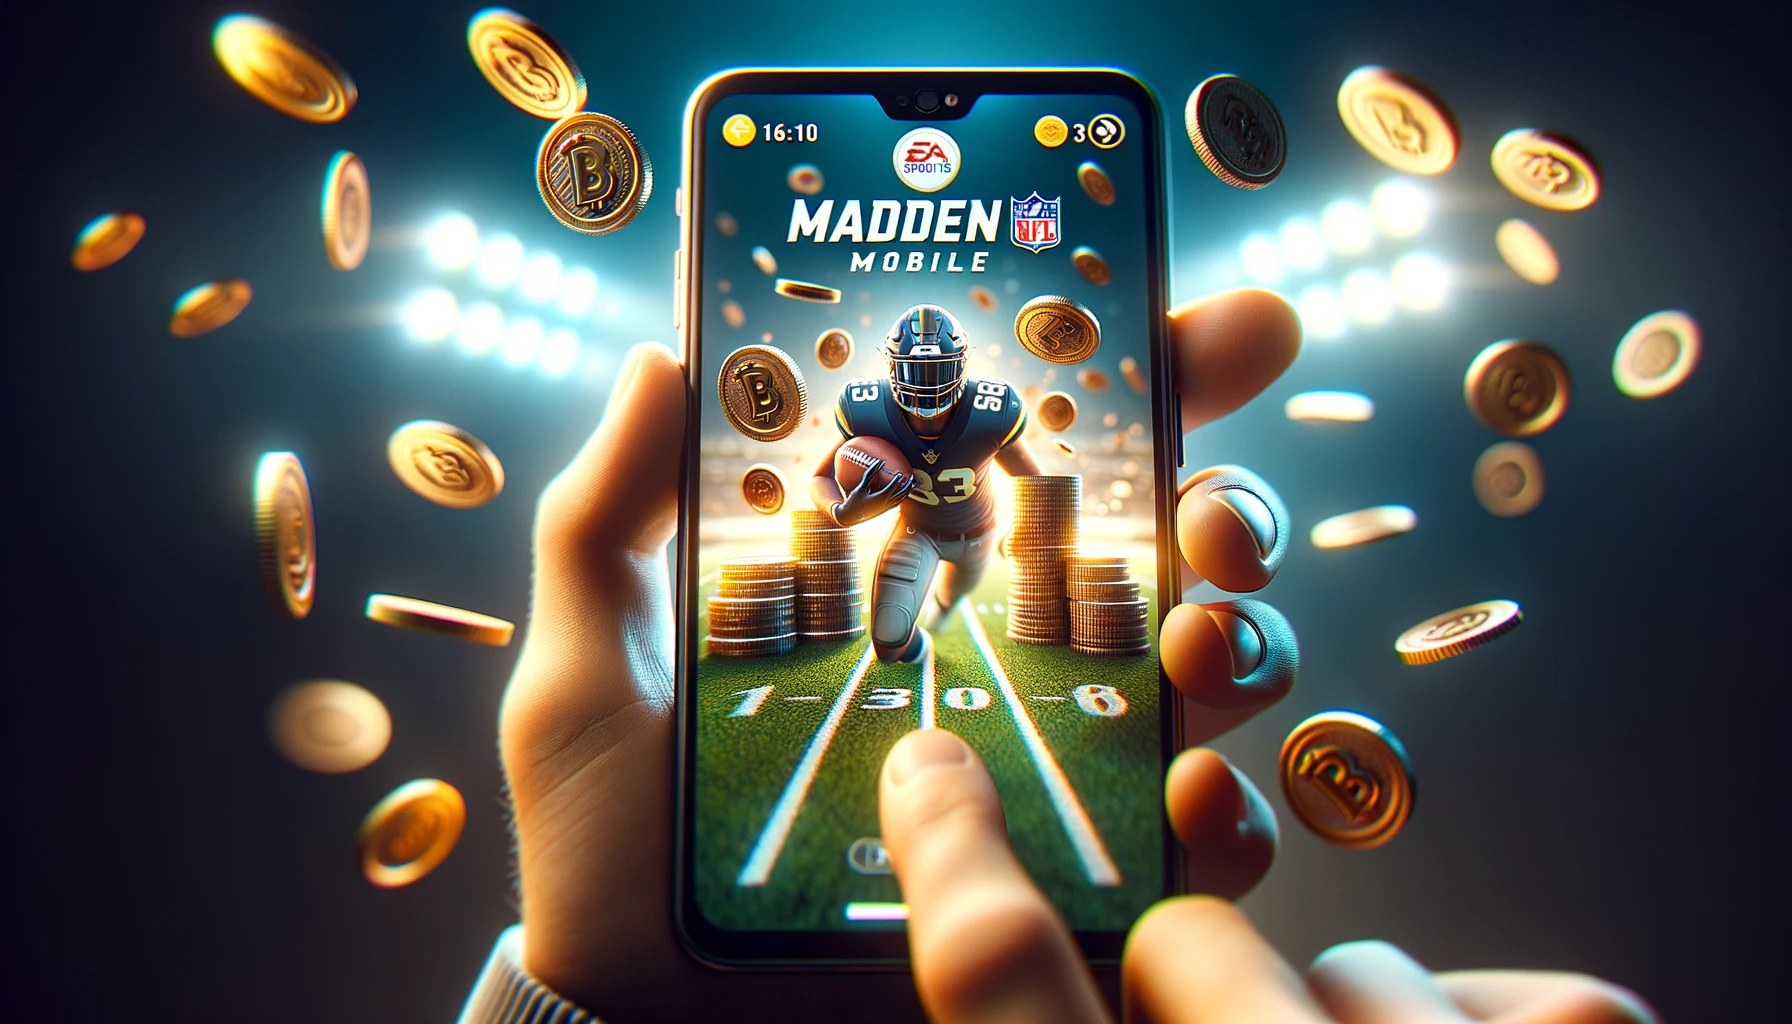 How to Get a Lot of Coins in Madden Mobile